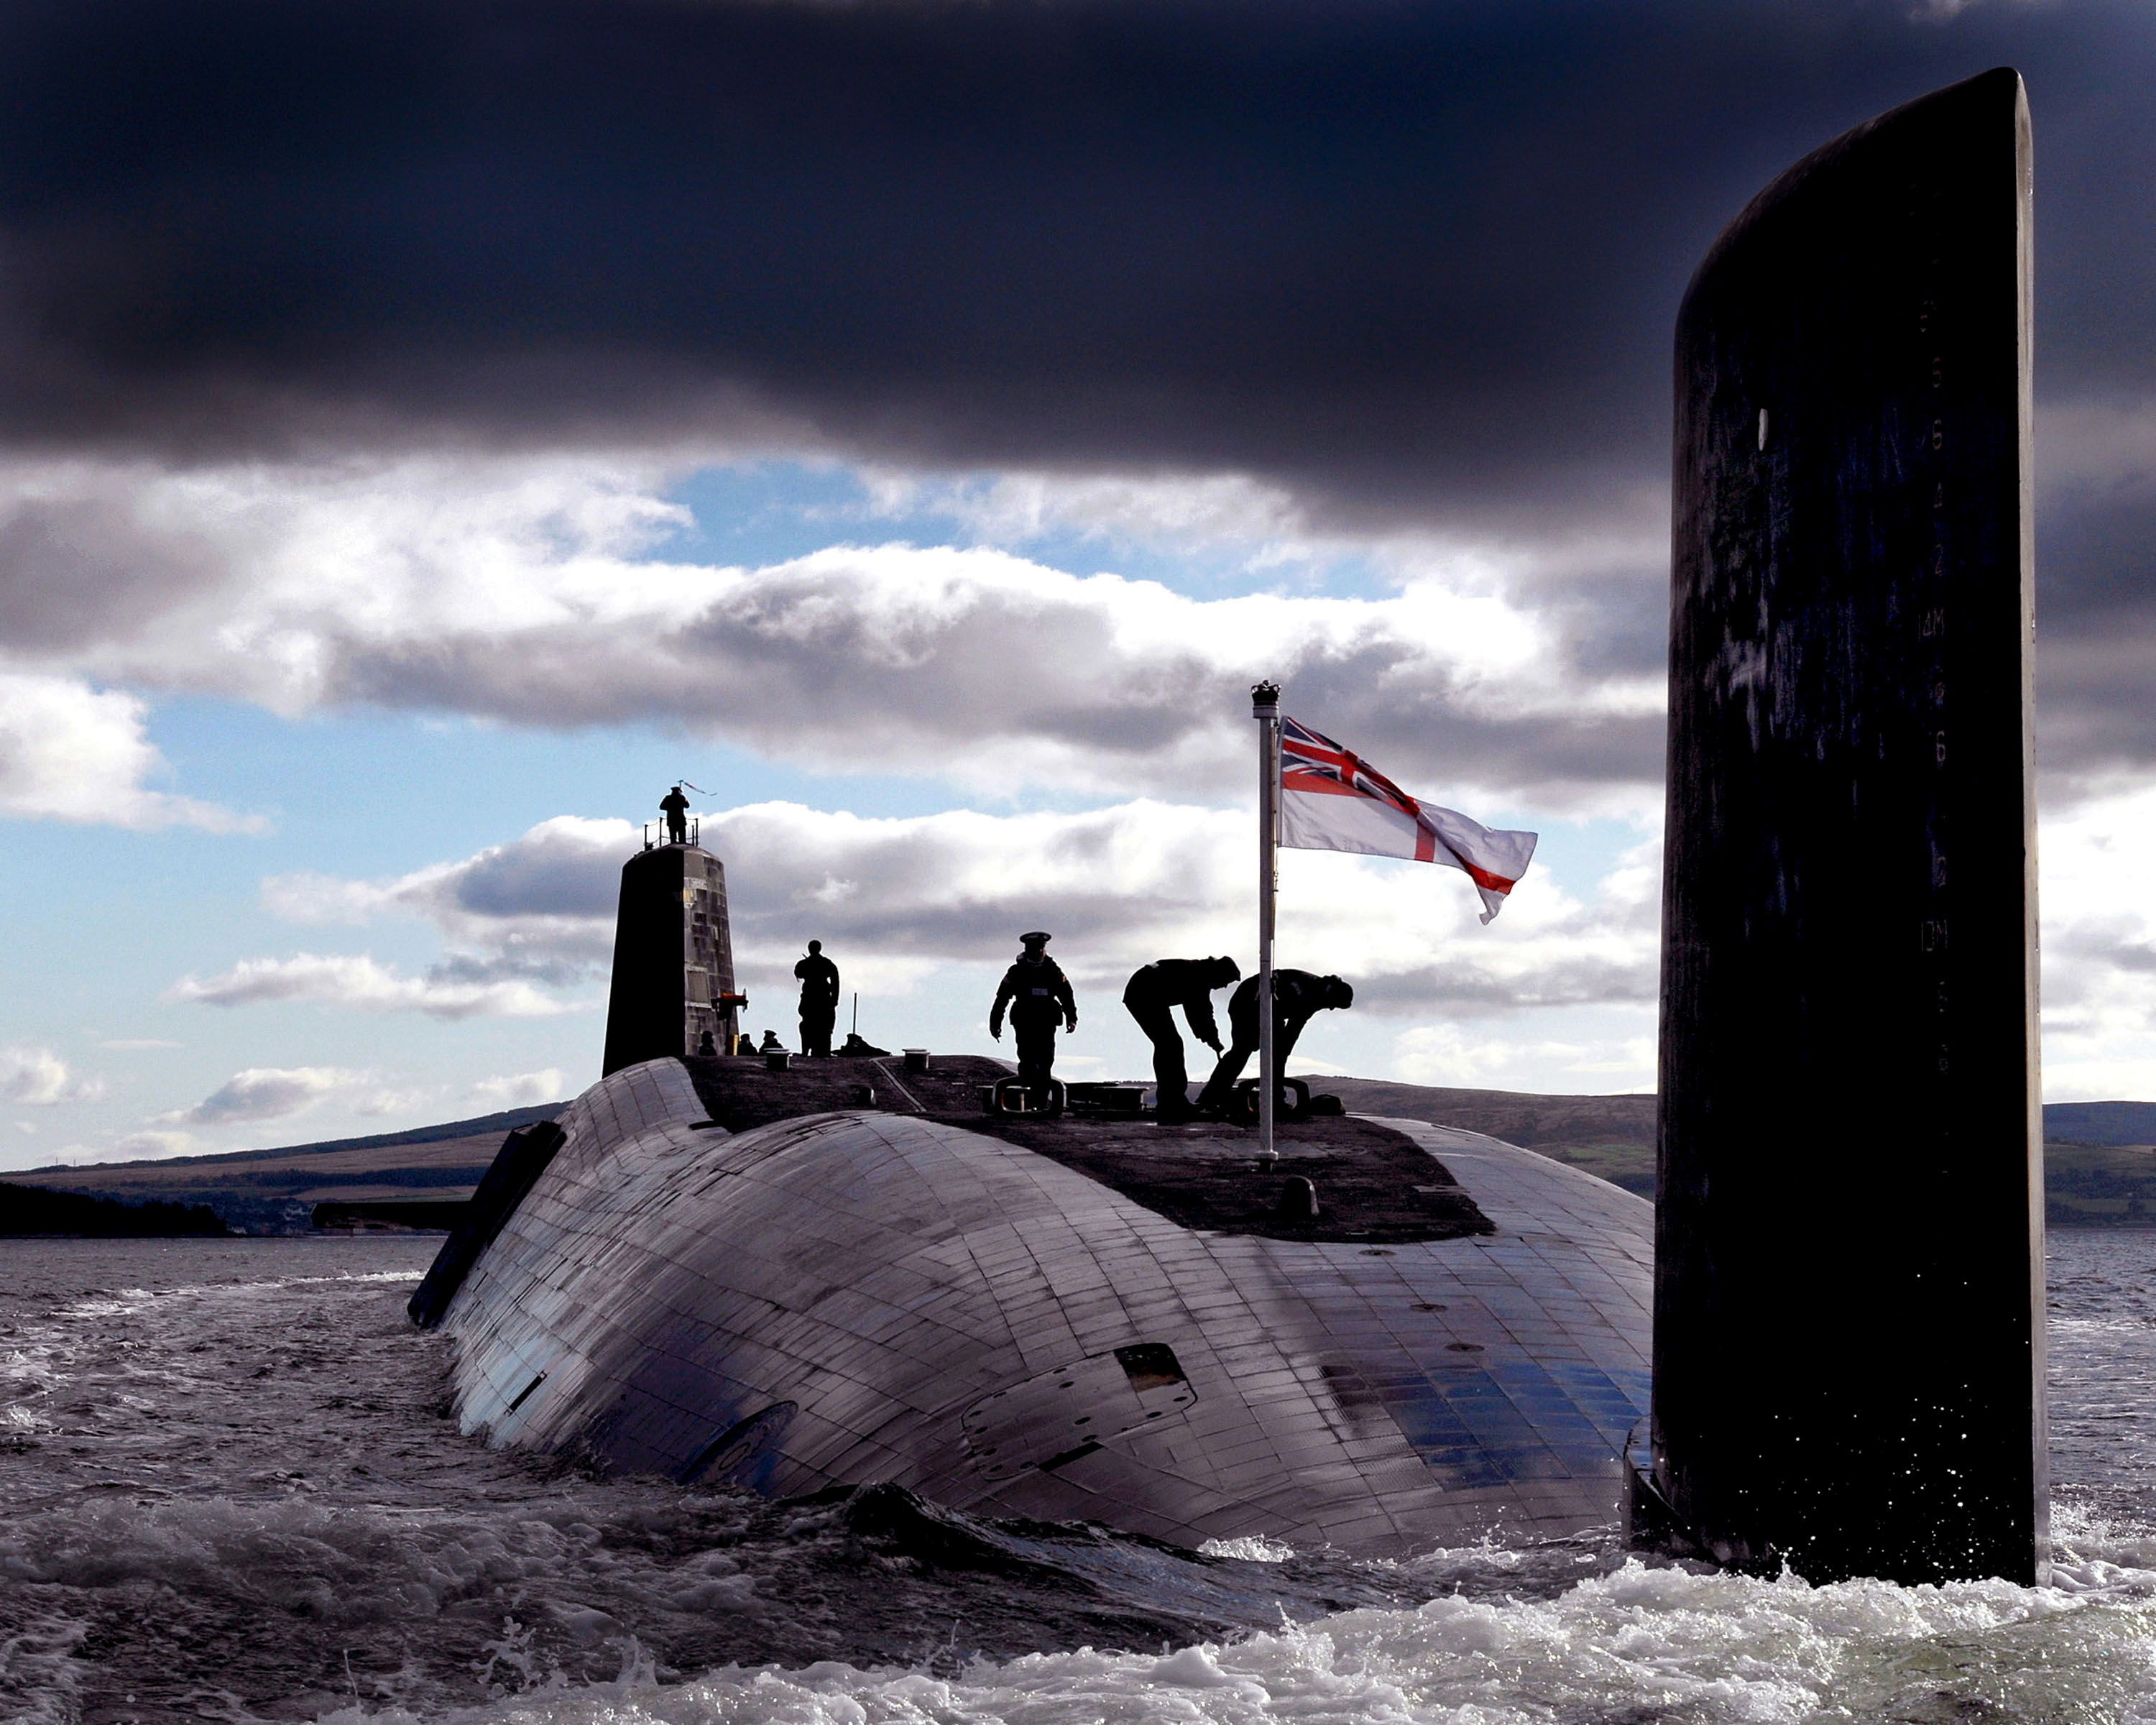 On board Britain's nuclear submarine Trident